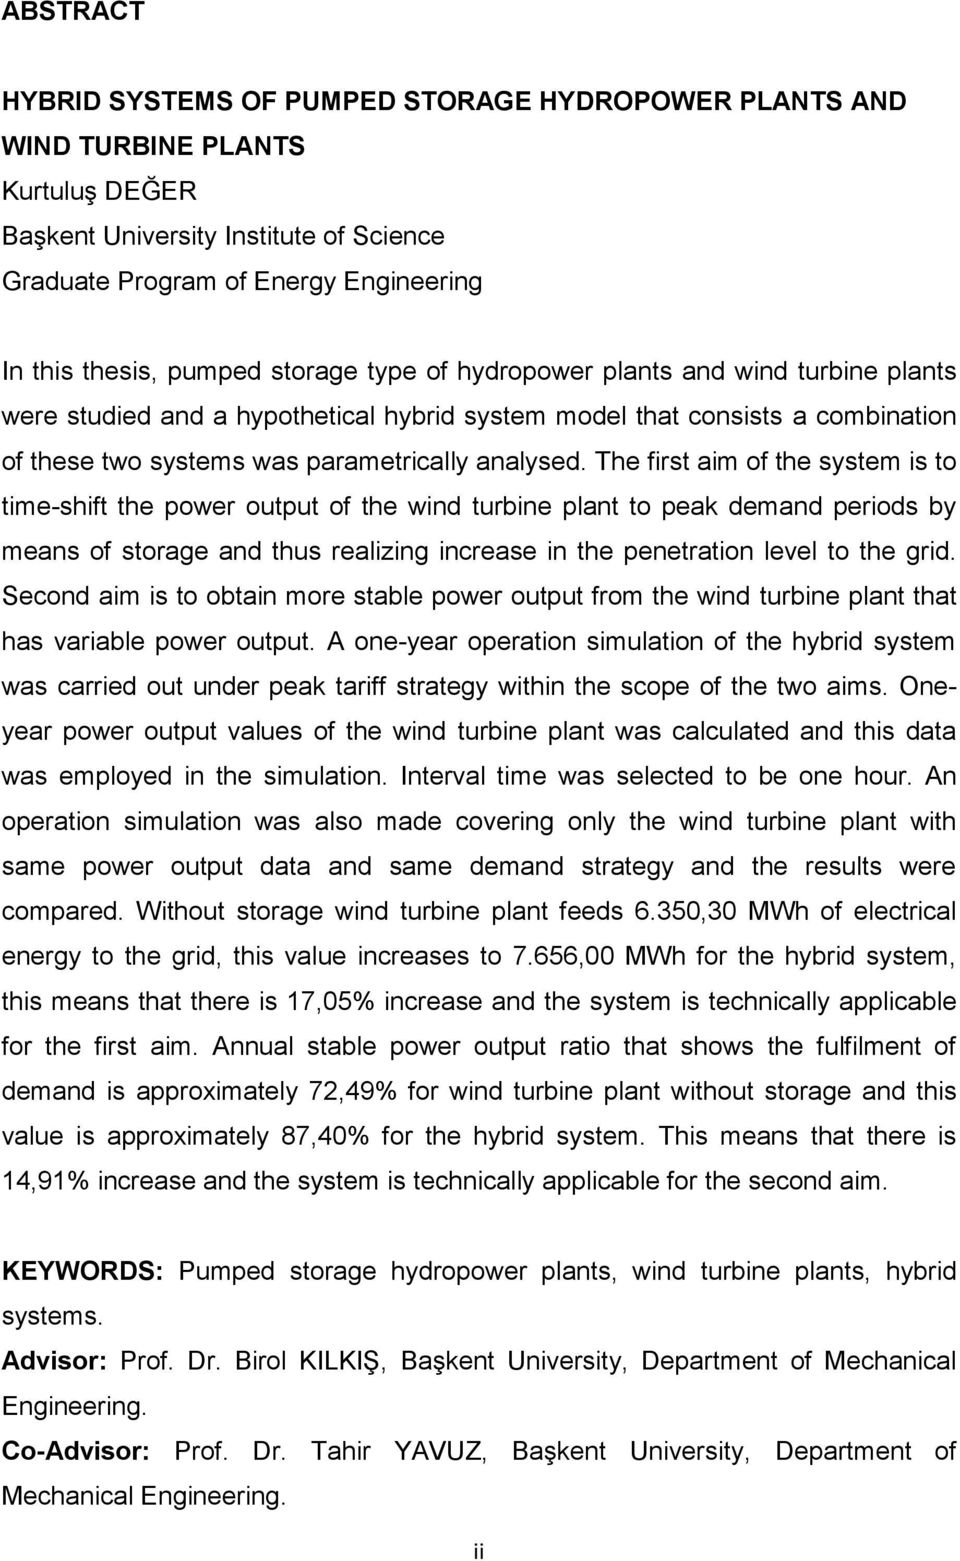 The first aim of the system is to time-shift the power output of the wind turbine plant to peak demand periods by means of storage and thus realizing increase in the penetration level to the grid.